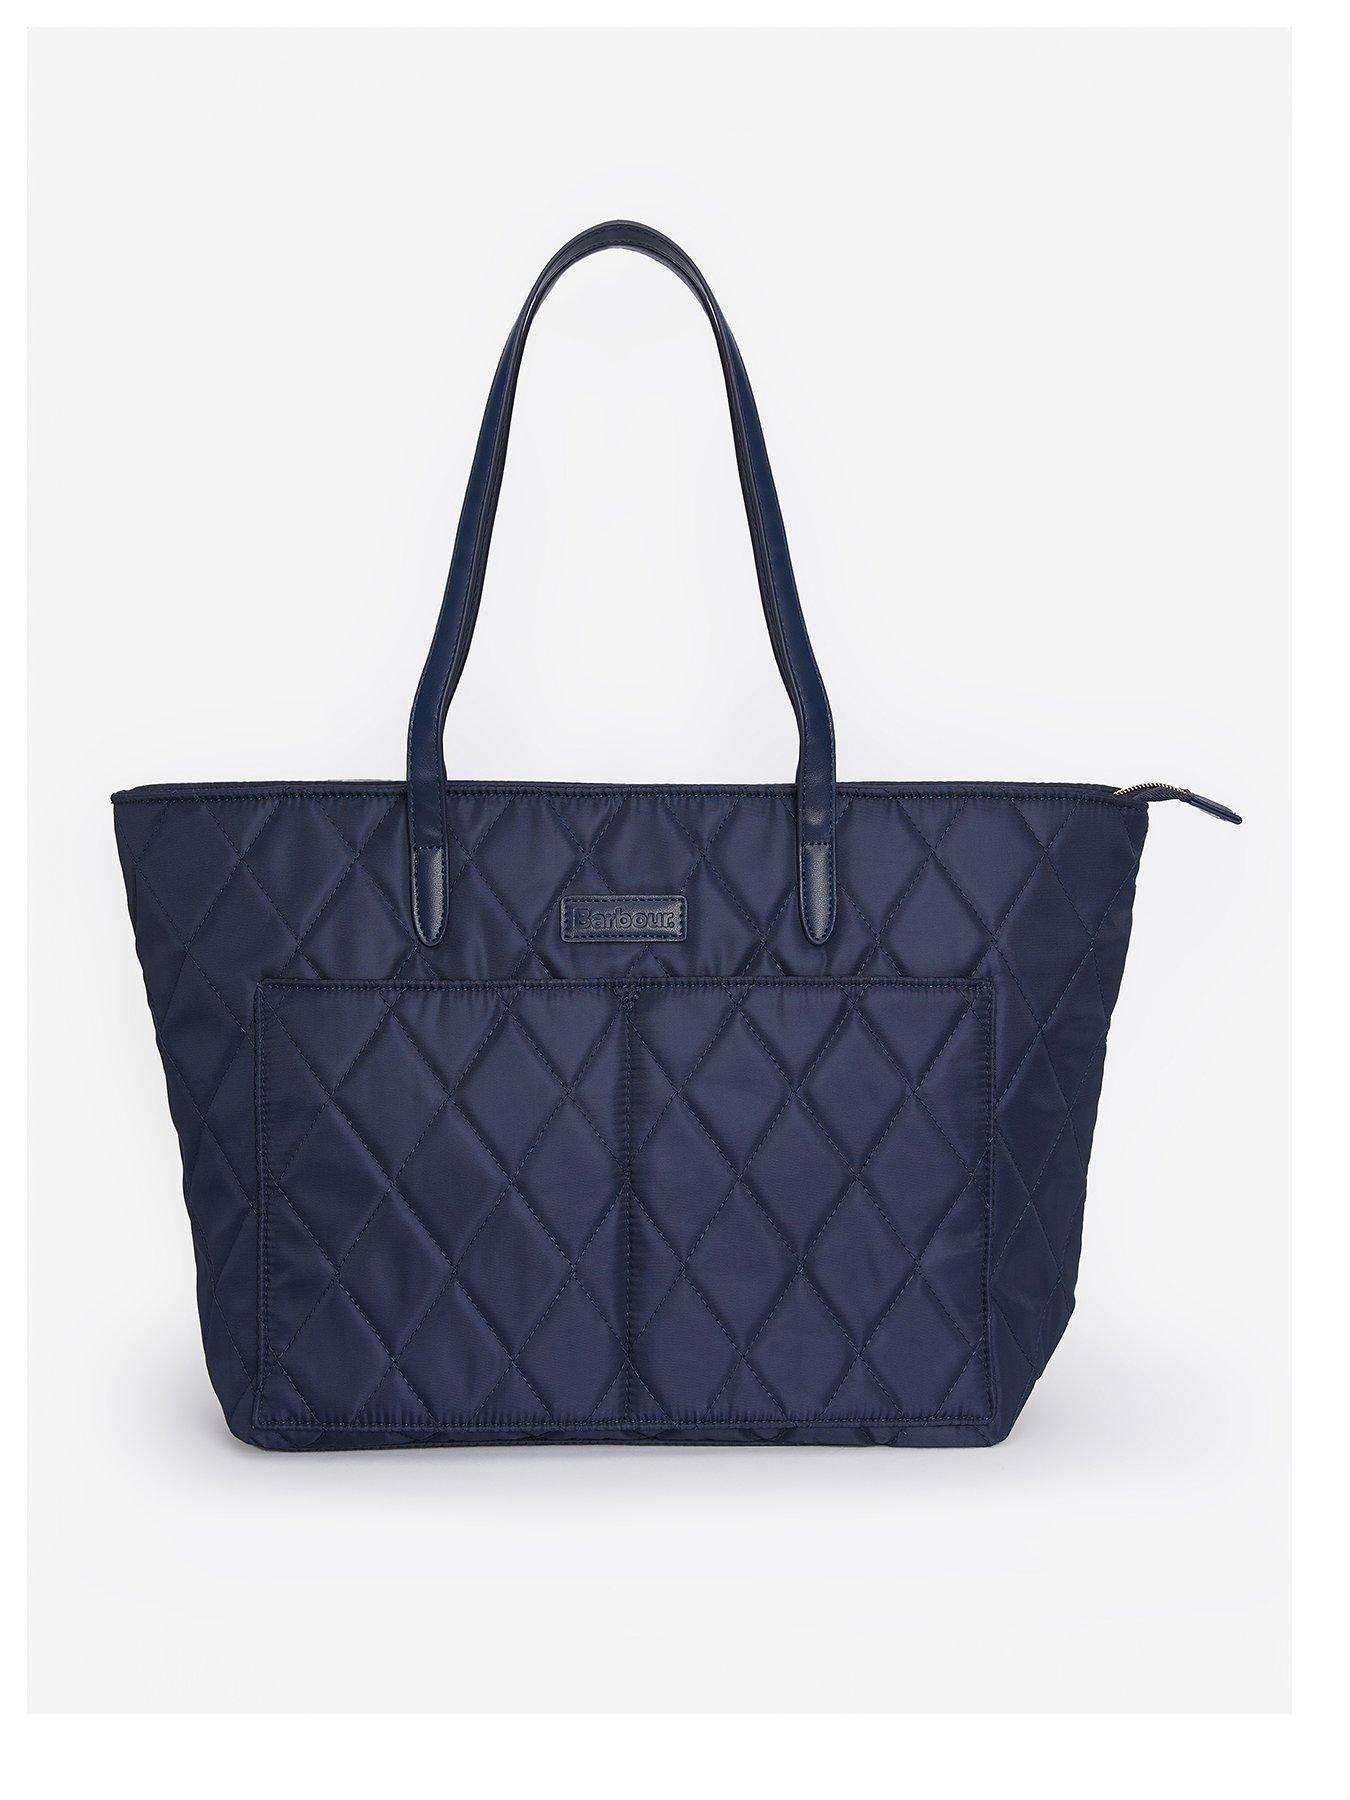 Barbour Quilted Tote Bag - Navy | very.co.uk